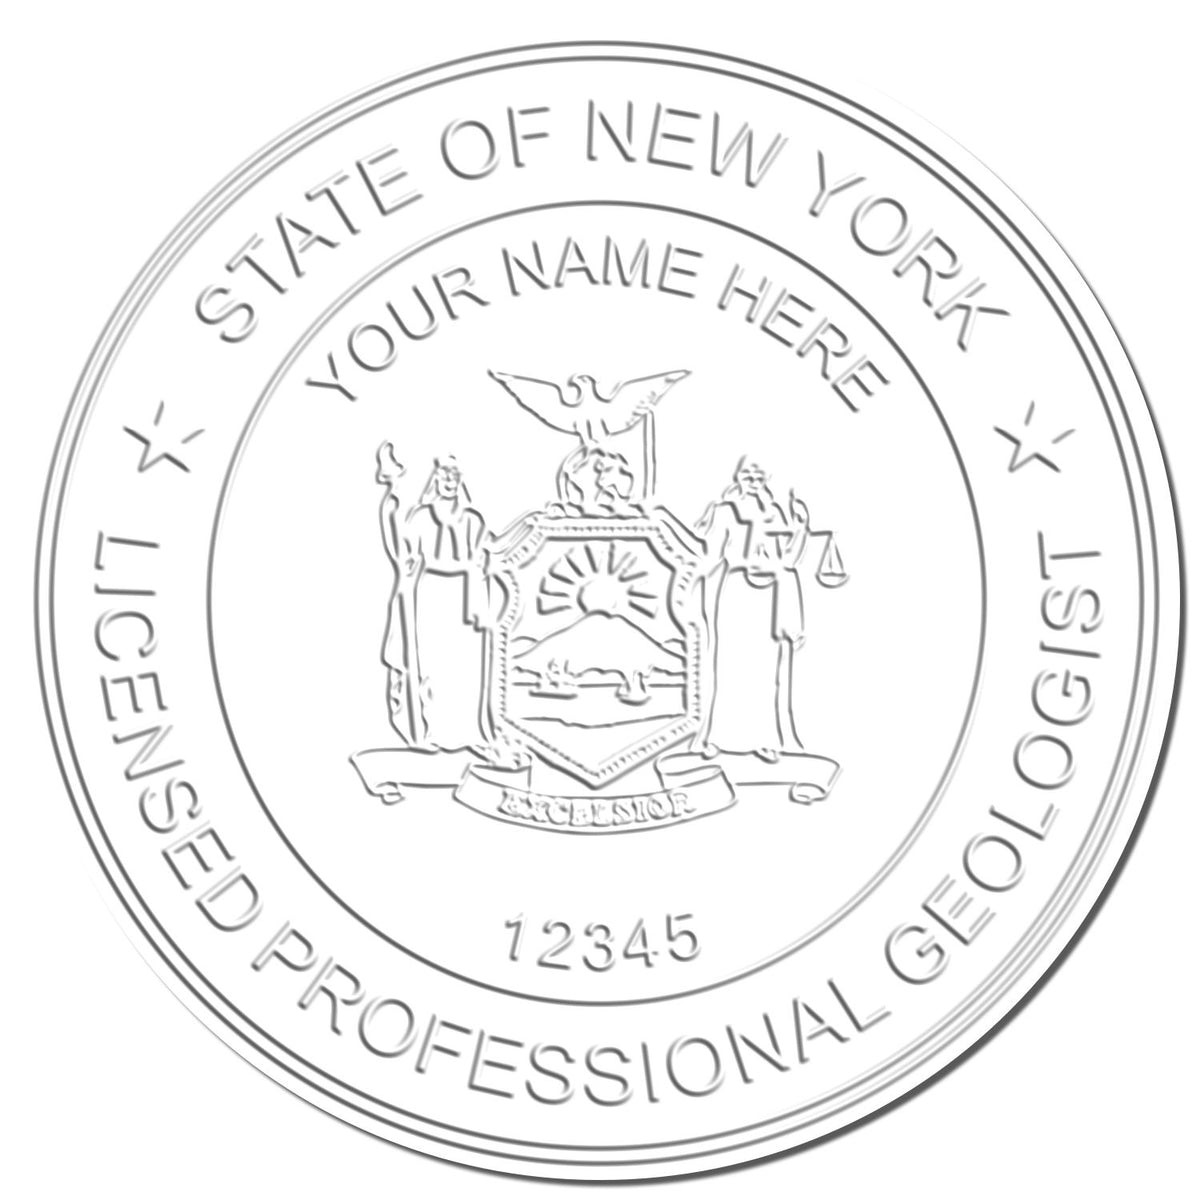 A photograph of the State of New York Extended Long Reach Geologist Seal stamp impression reveals a vivid, professional image of the on paper.